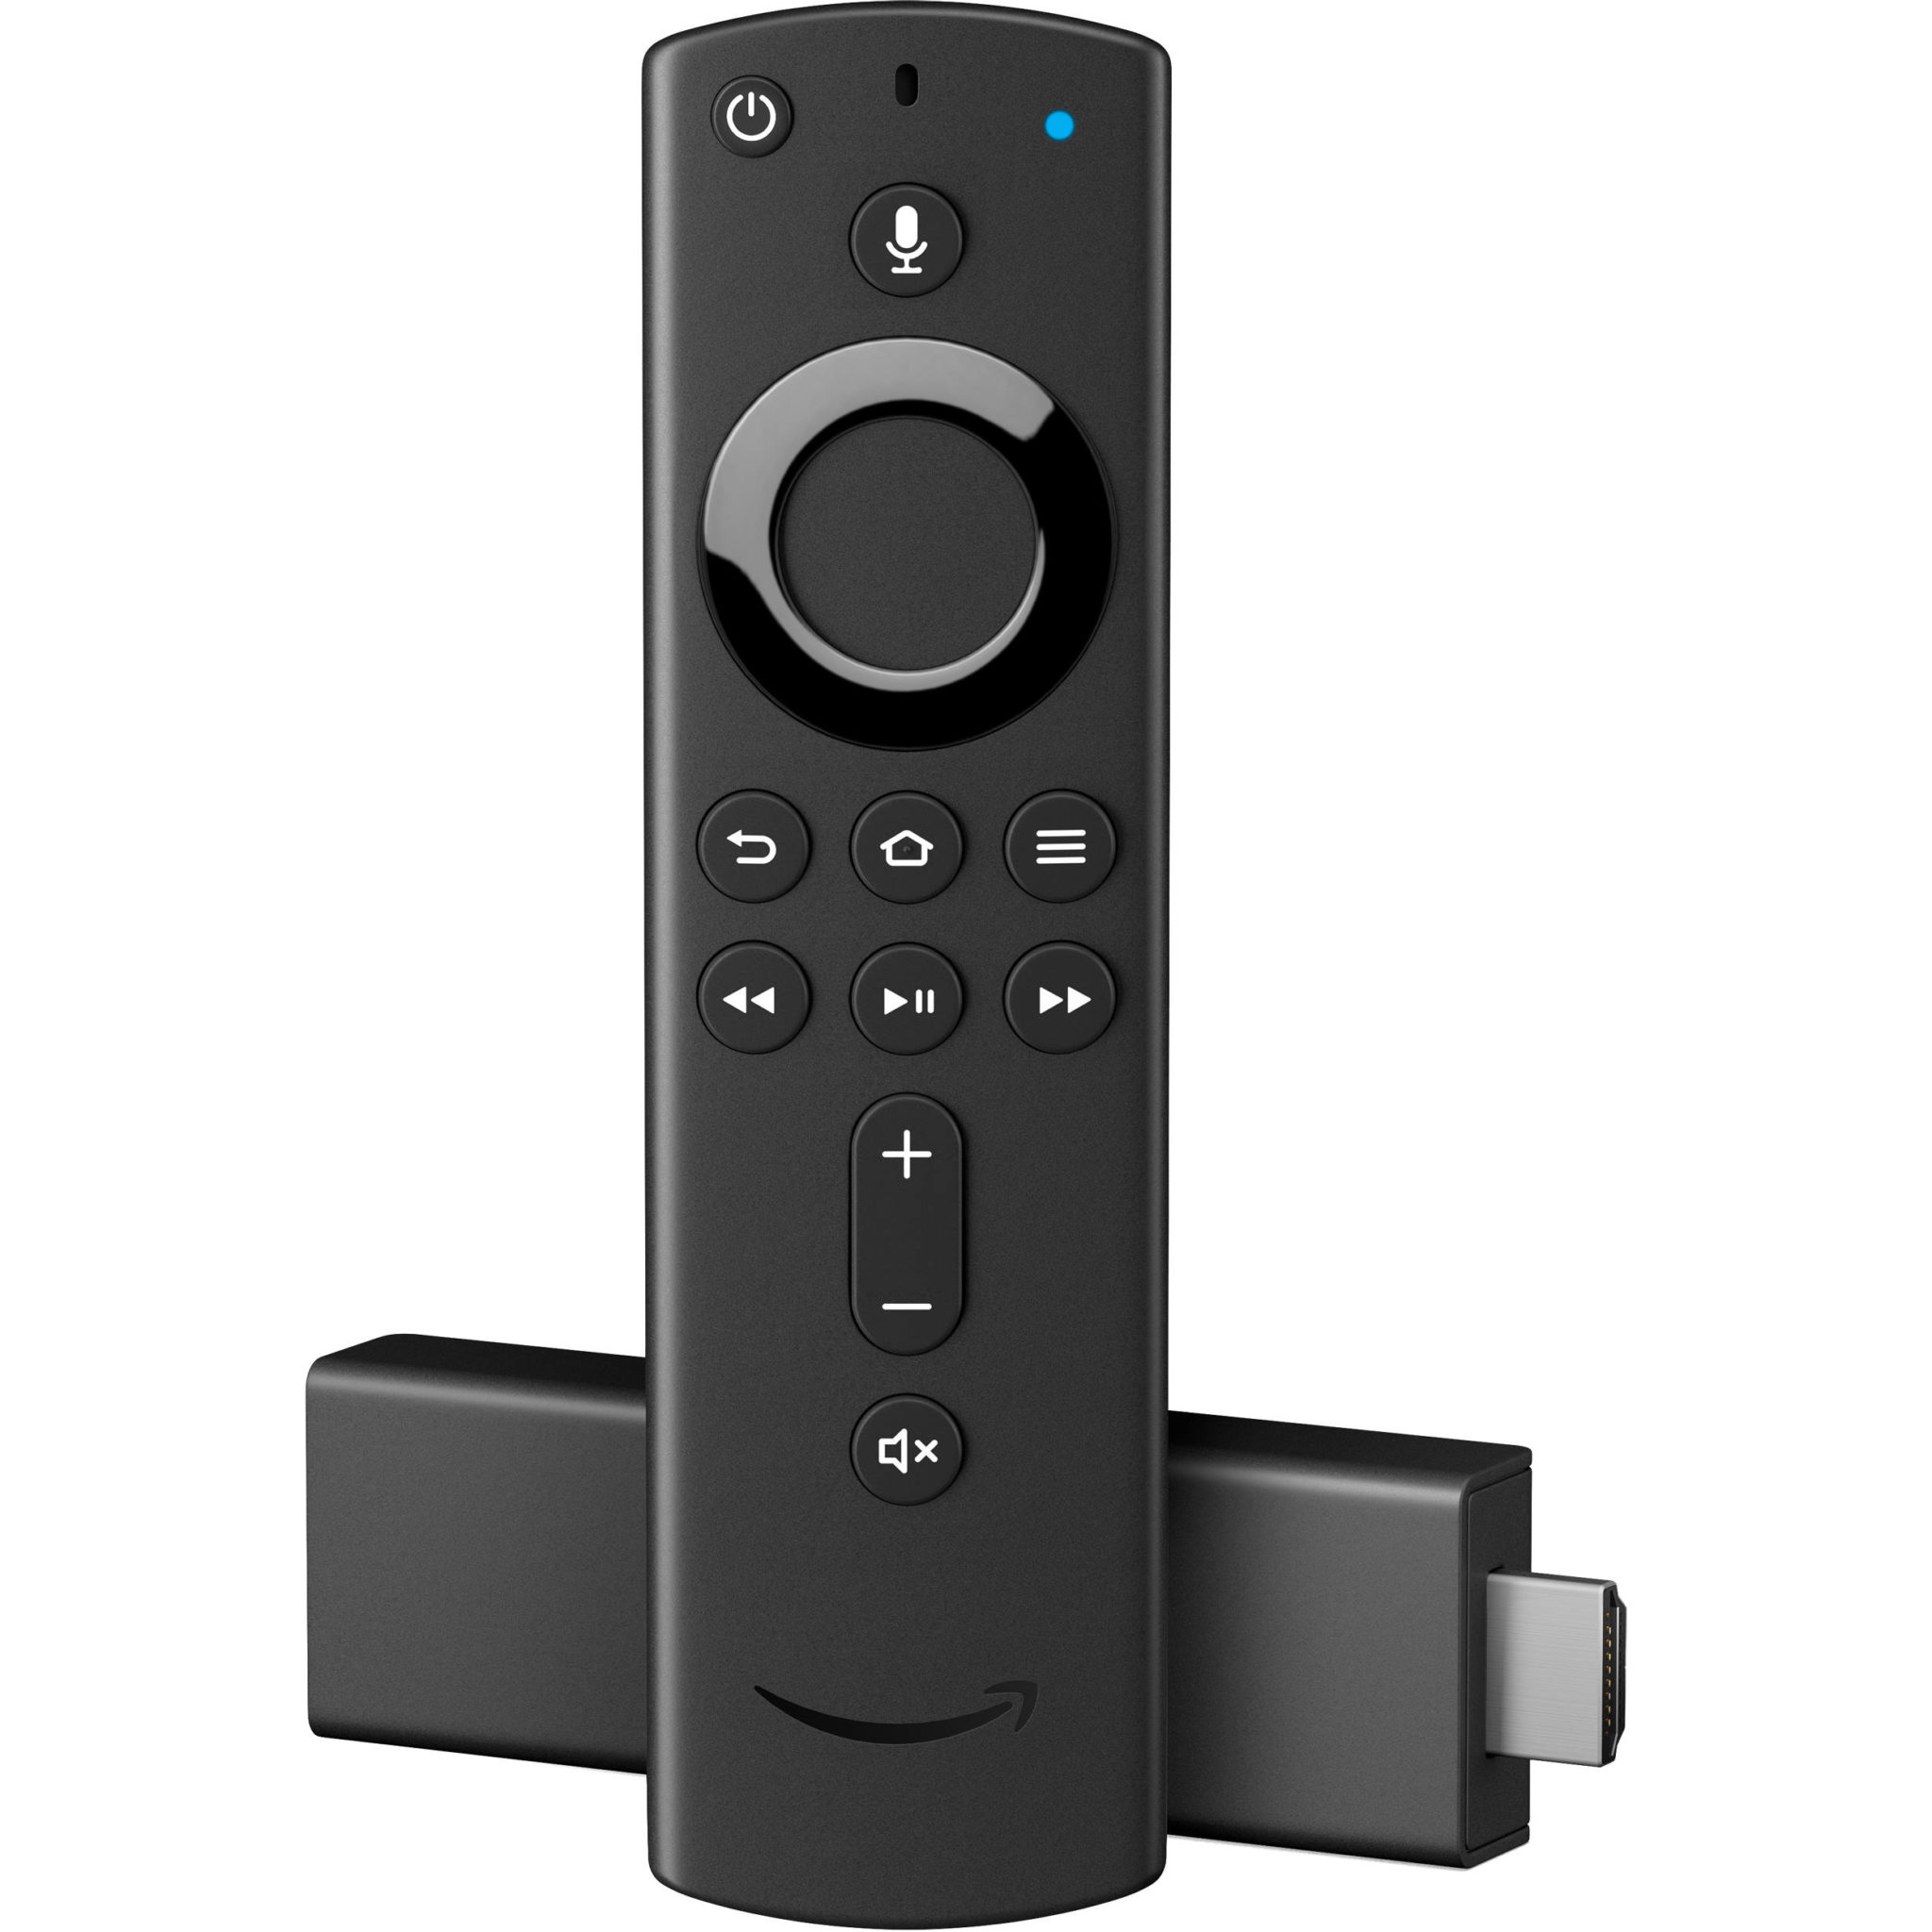 Amazon’s Black Friday $24.99 Fire TV Stick 4K Deal Is Still Available (With Promo Code)